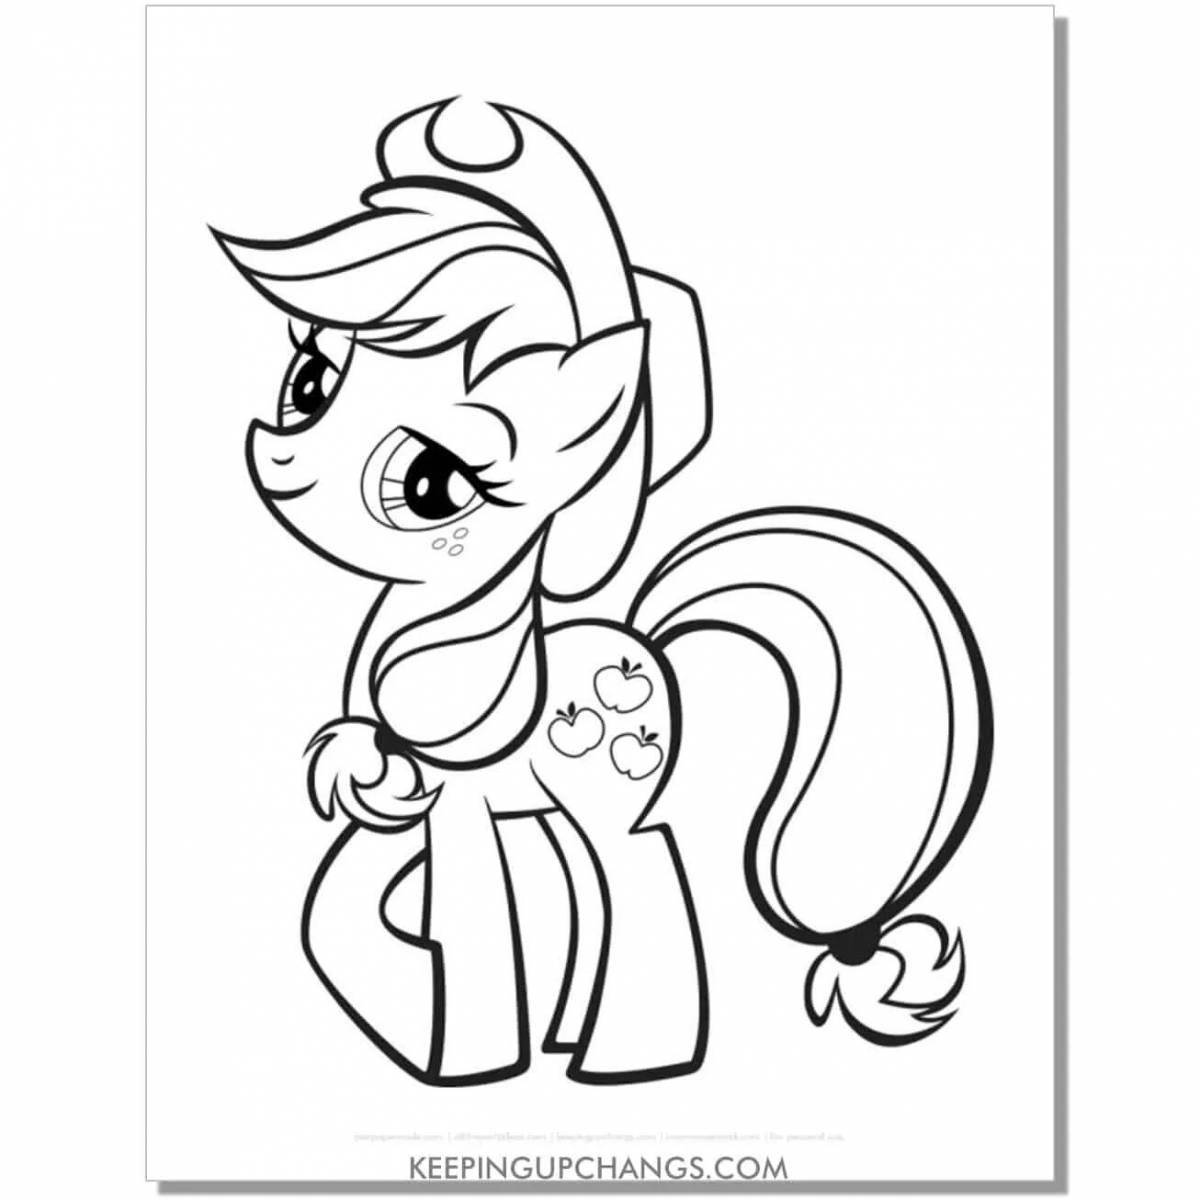 Live coloring pony for girls 4-5 years old